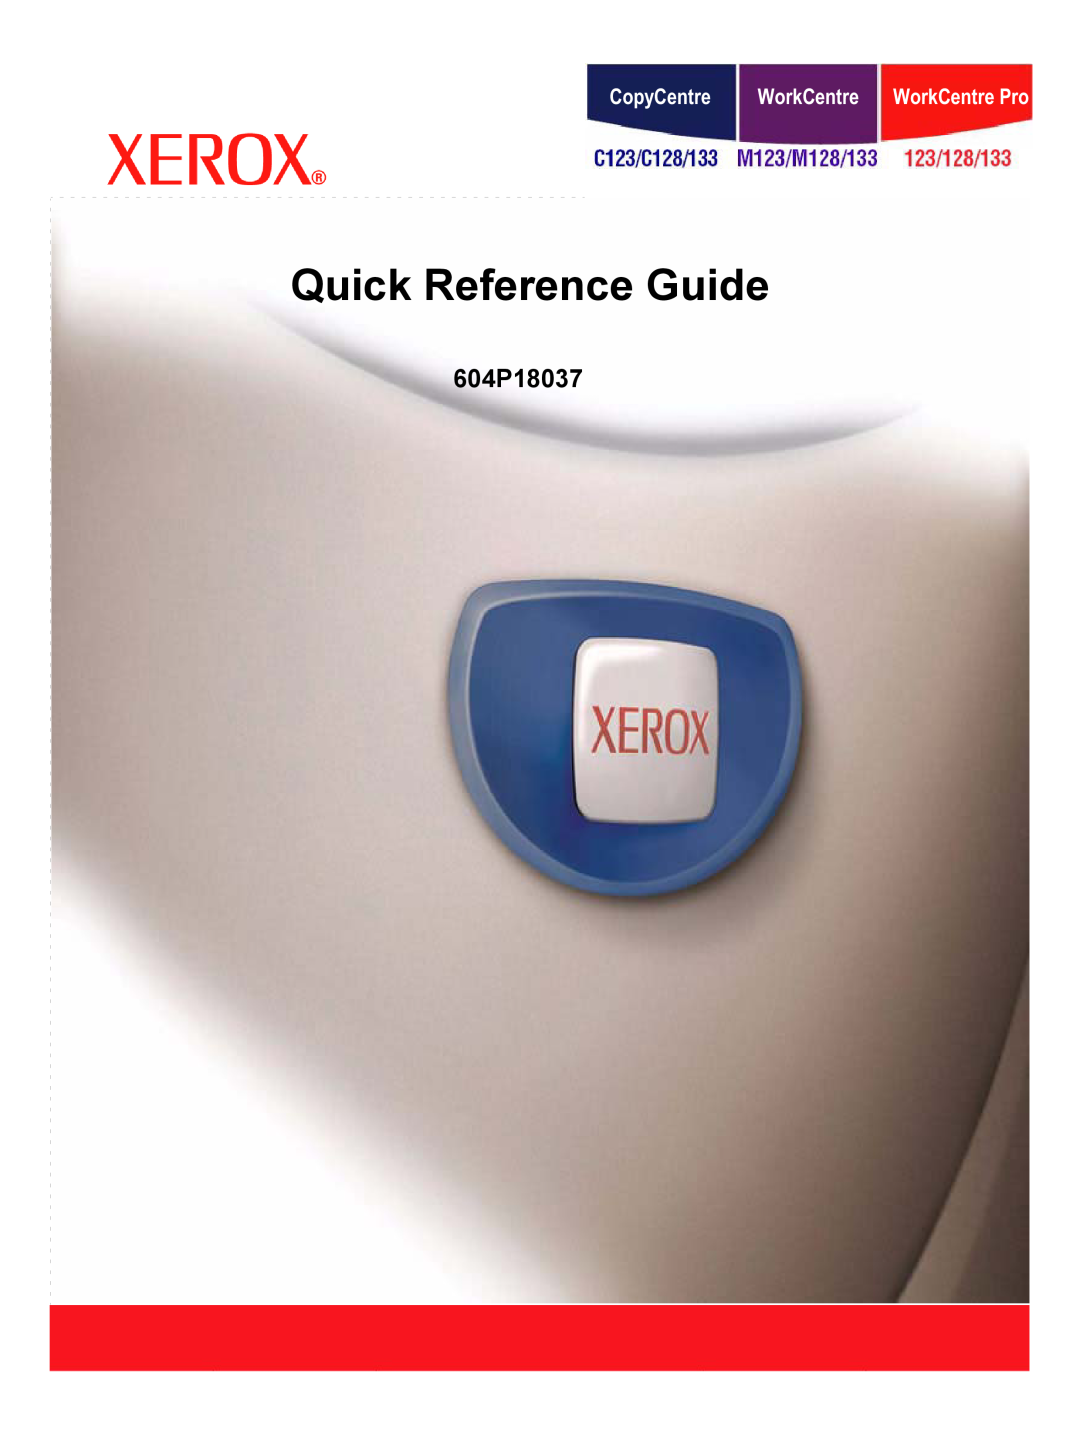 Xerox 604P18037 manual Quick Reference Guide, CopyCentre, WorkCentre Pro 